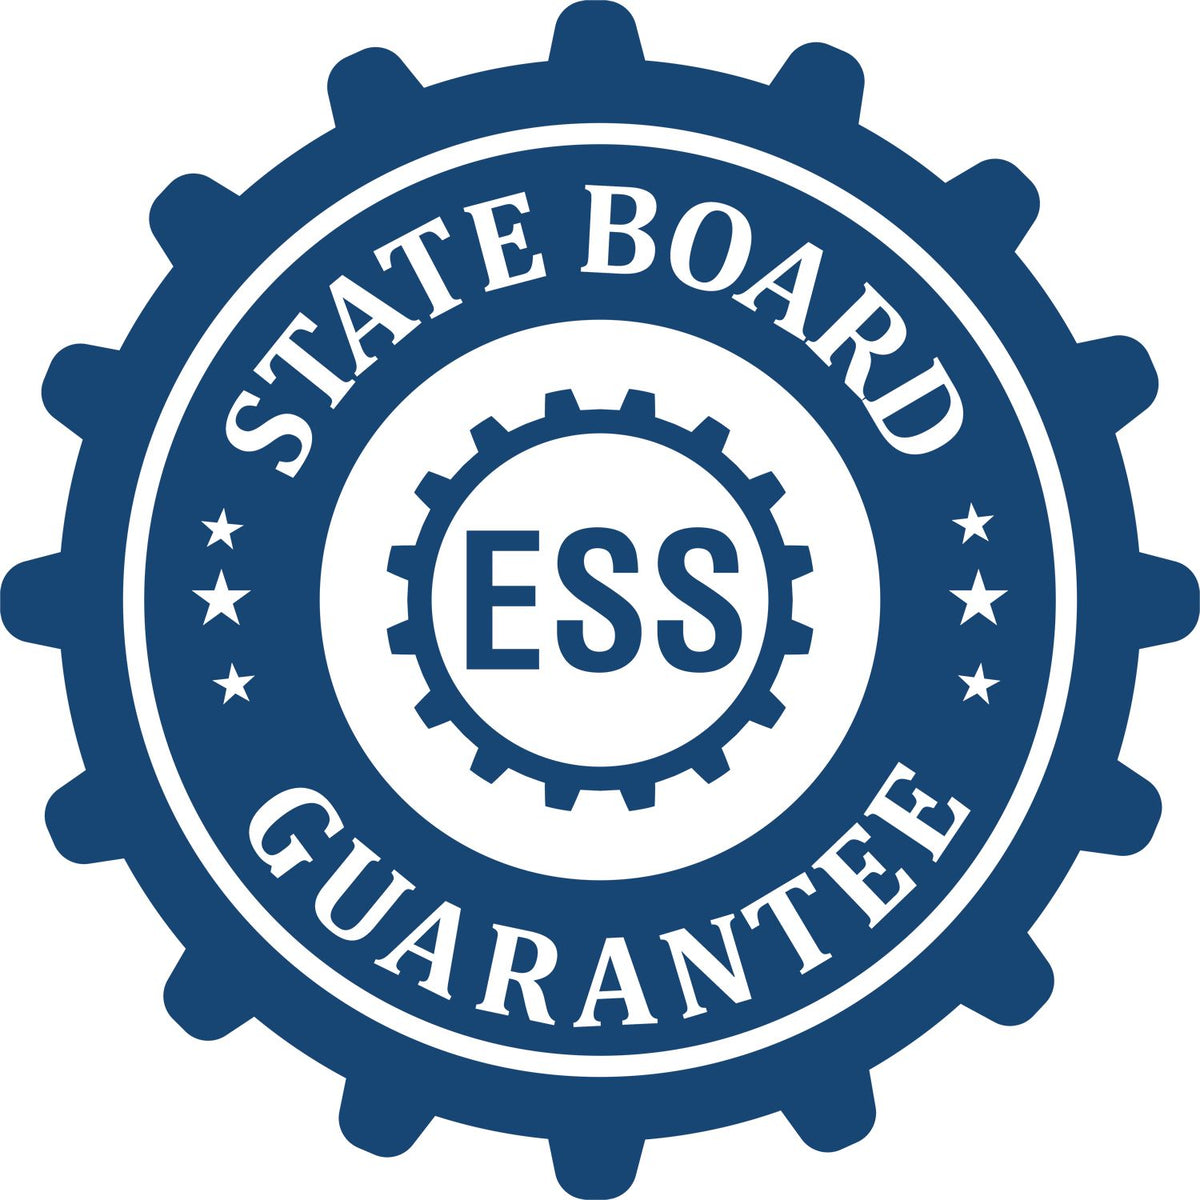 An emblem in a gear shape illustrating a state board guarantee for the Vermont Geologist Desk Seal